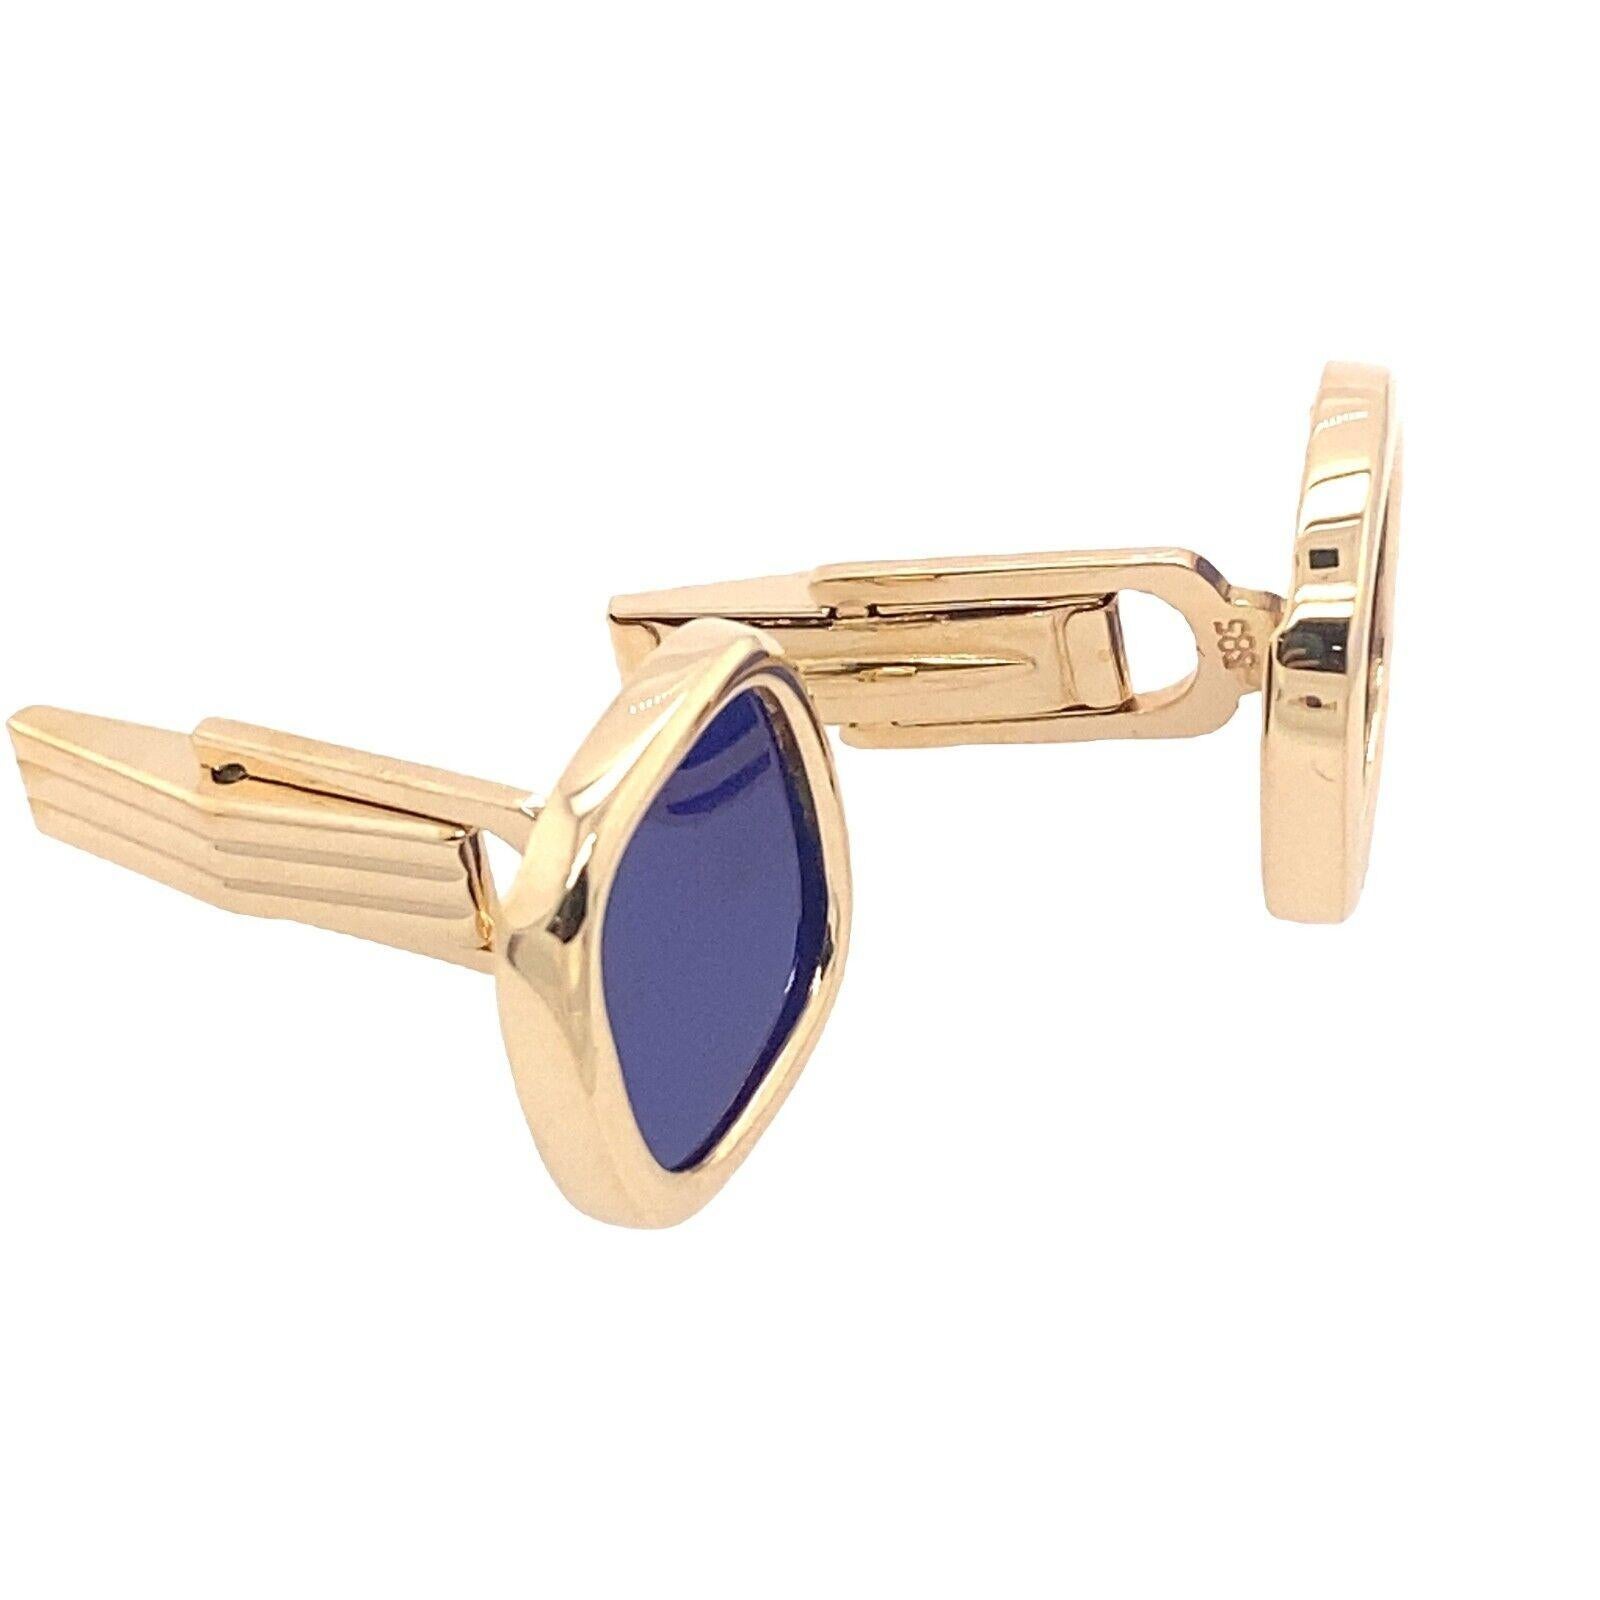 Classic Cushion Shape 14ct Yellow Gold Lapiz Lazuli Cufflinks

These 14ct Yellow Gold Lapiz Lazuli Cufflinks are classic and have a lovely design that is sure to catch attention.

Additional Information:
Total Gold Weight: 8.7g
Item Dimension: